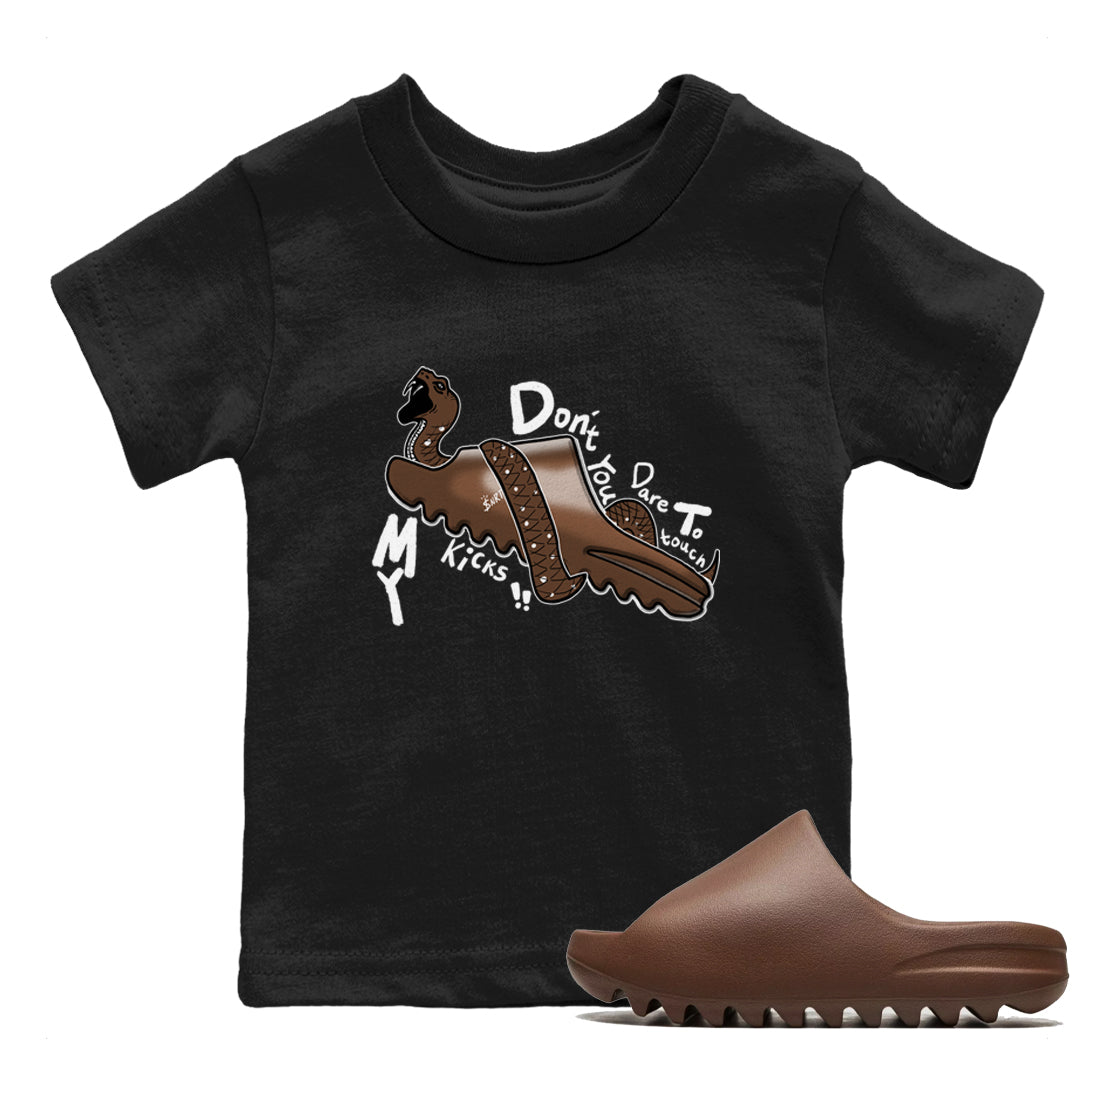 Yeezy Slide Flax shirts to match jordans Don't Touch My Kicks sneaker match tees Yeezy Slide Flax SNRT Sneaker Tees streetwear brand Baby and Youth Black 1 cotton tee